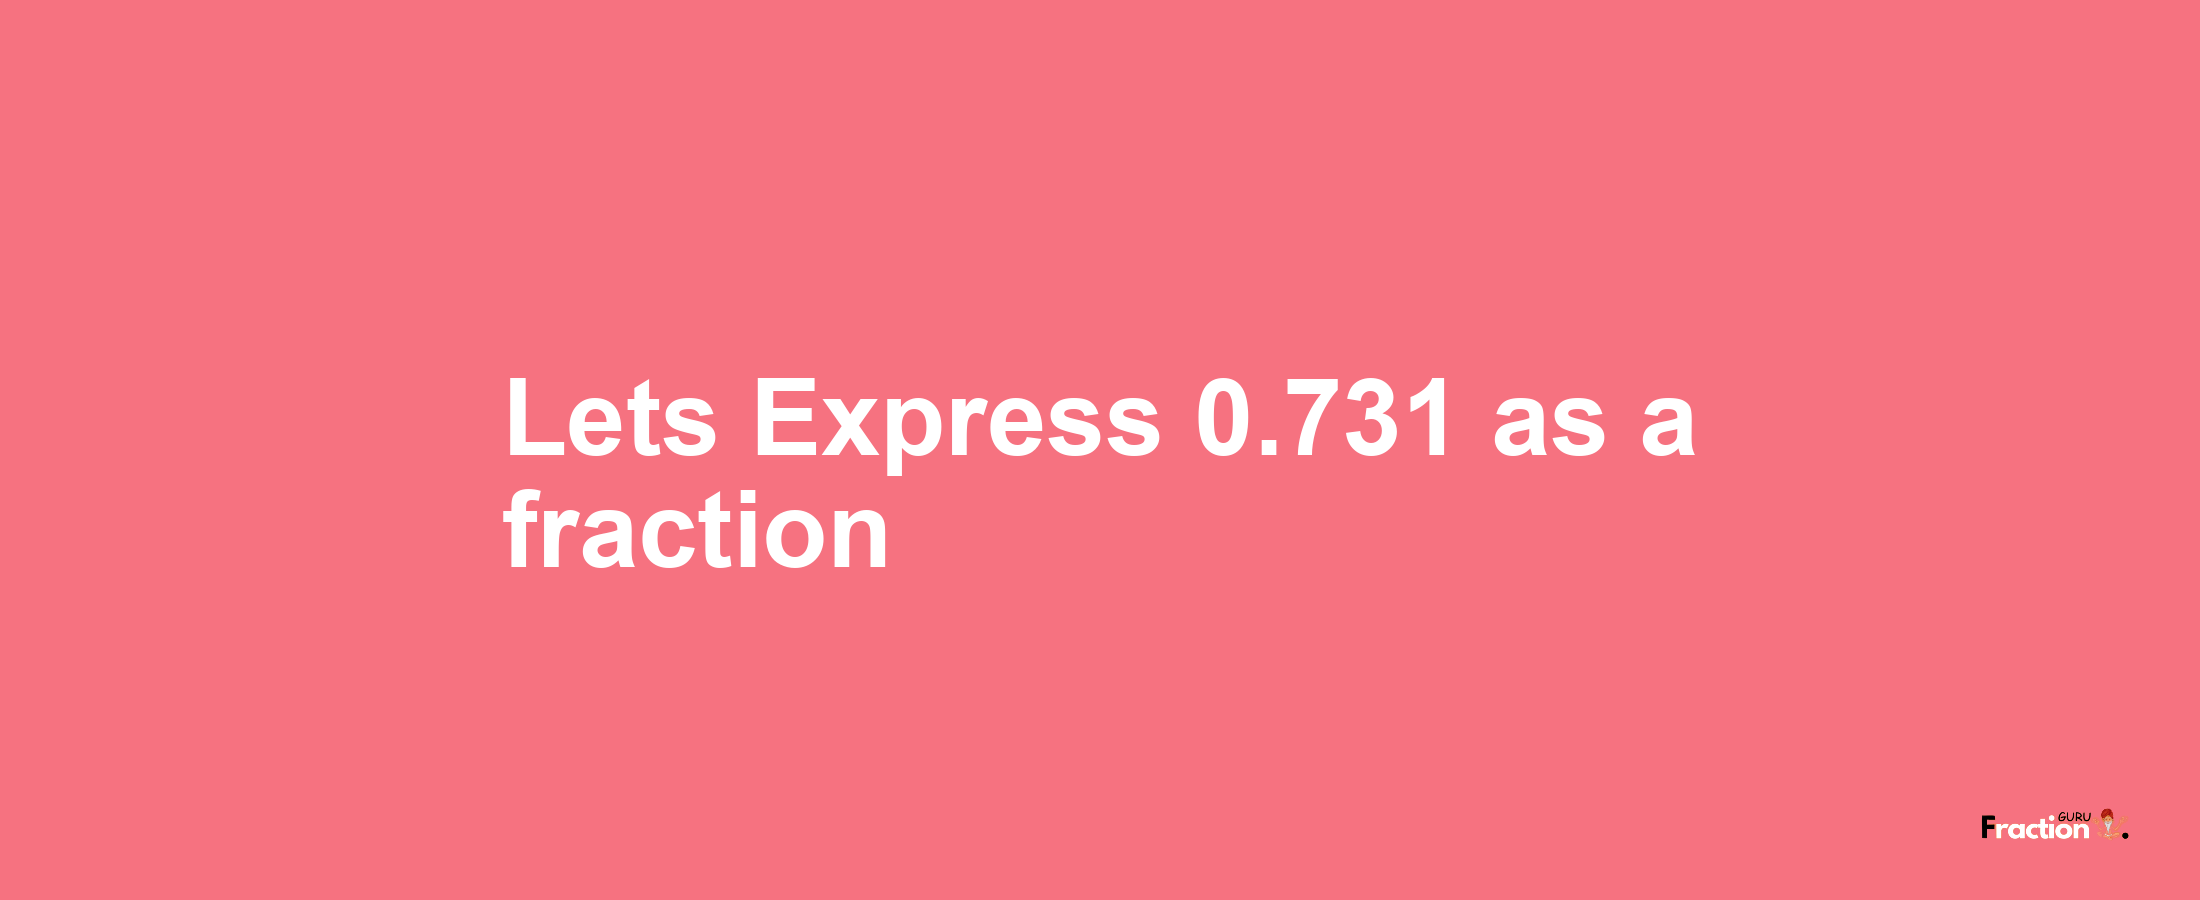 Lets Express 0.731 as afraction